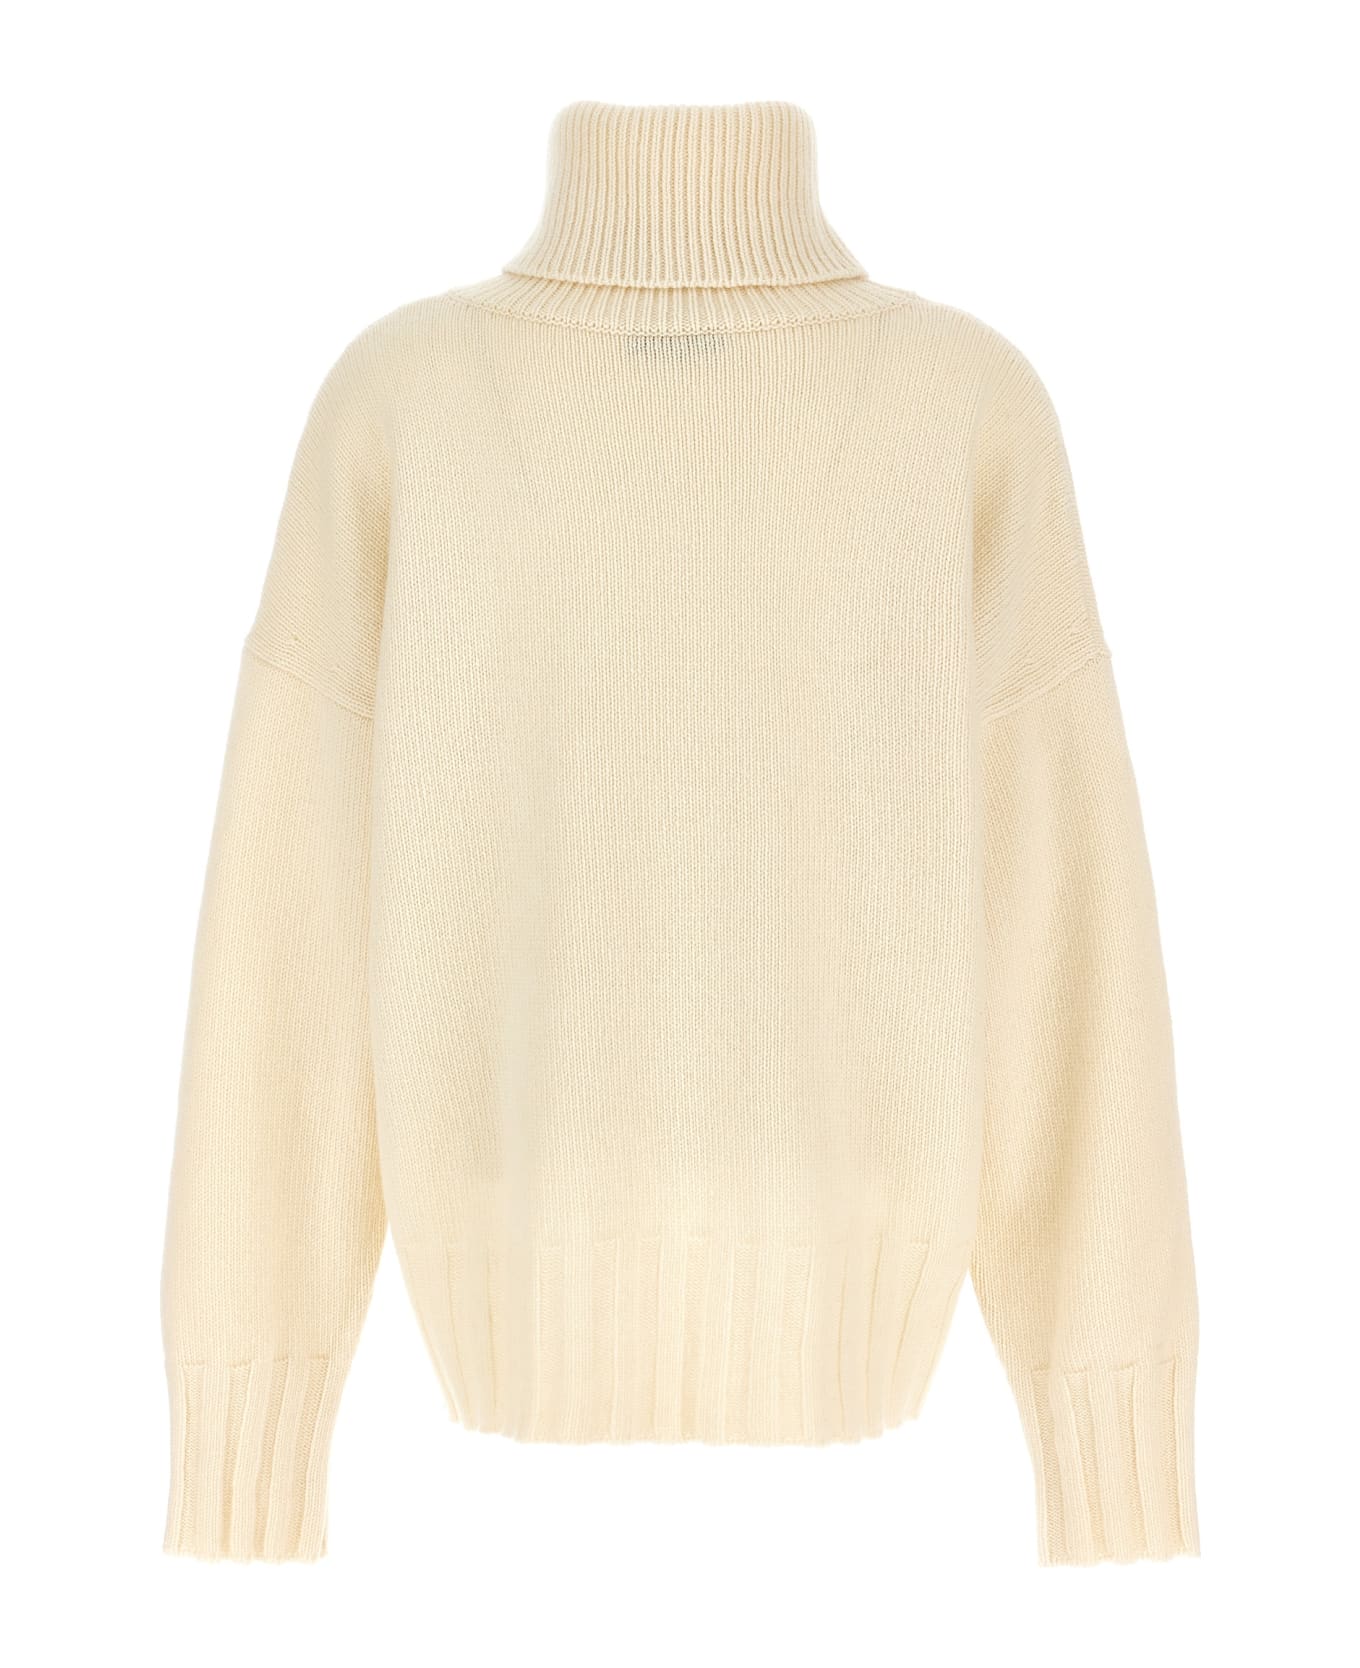 Made in Tomboy 'ely' Sweater - White